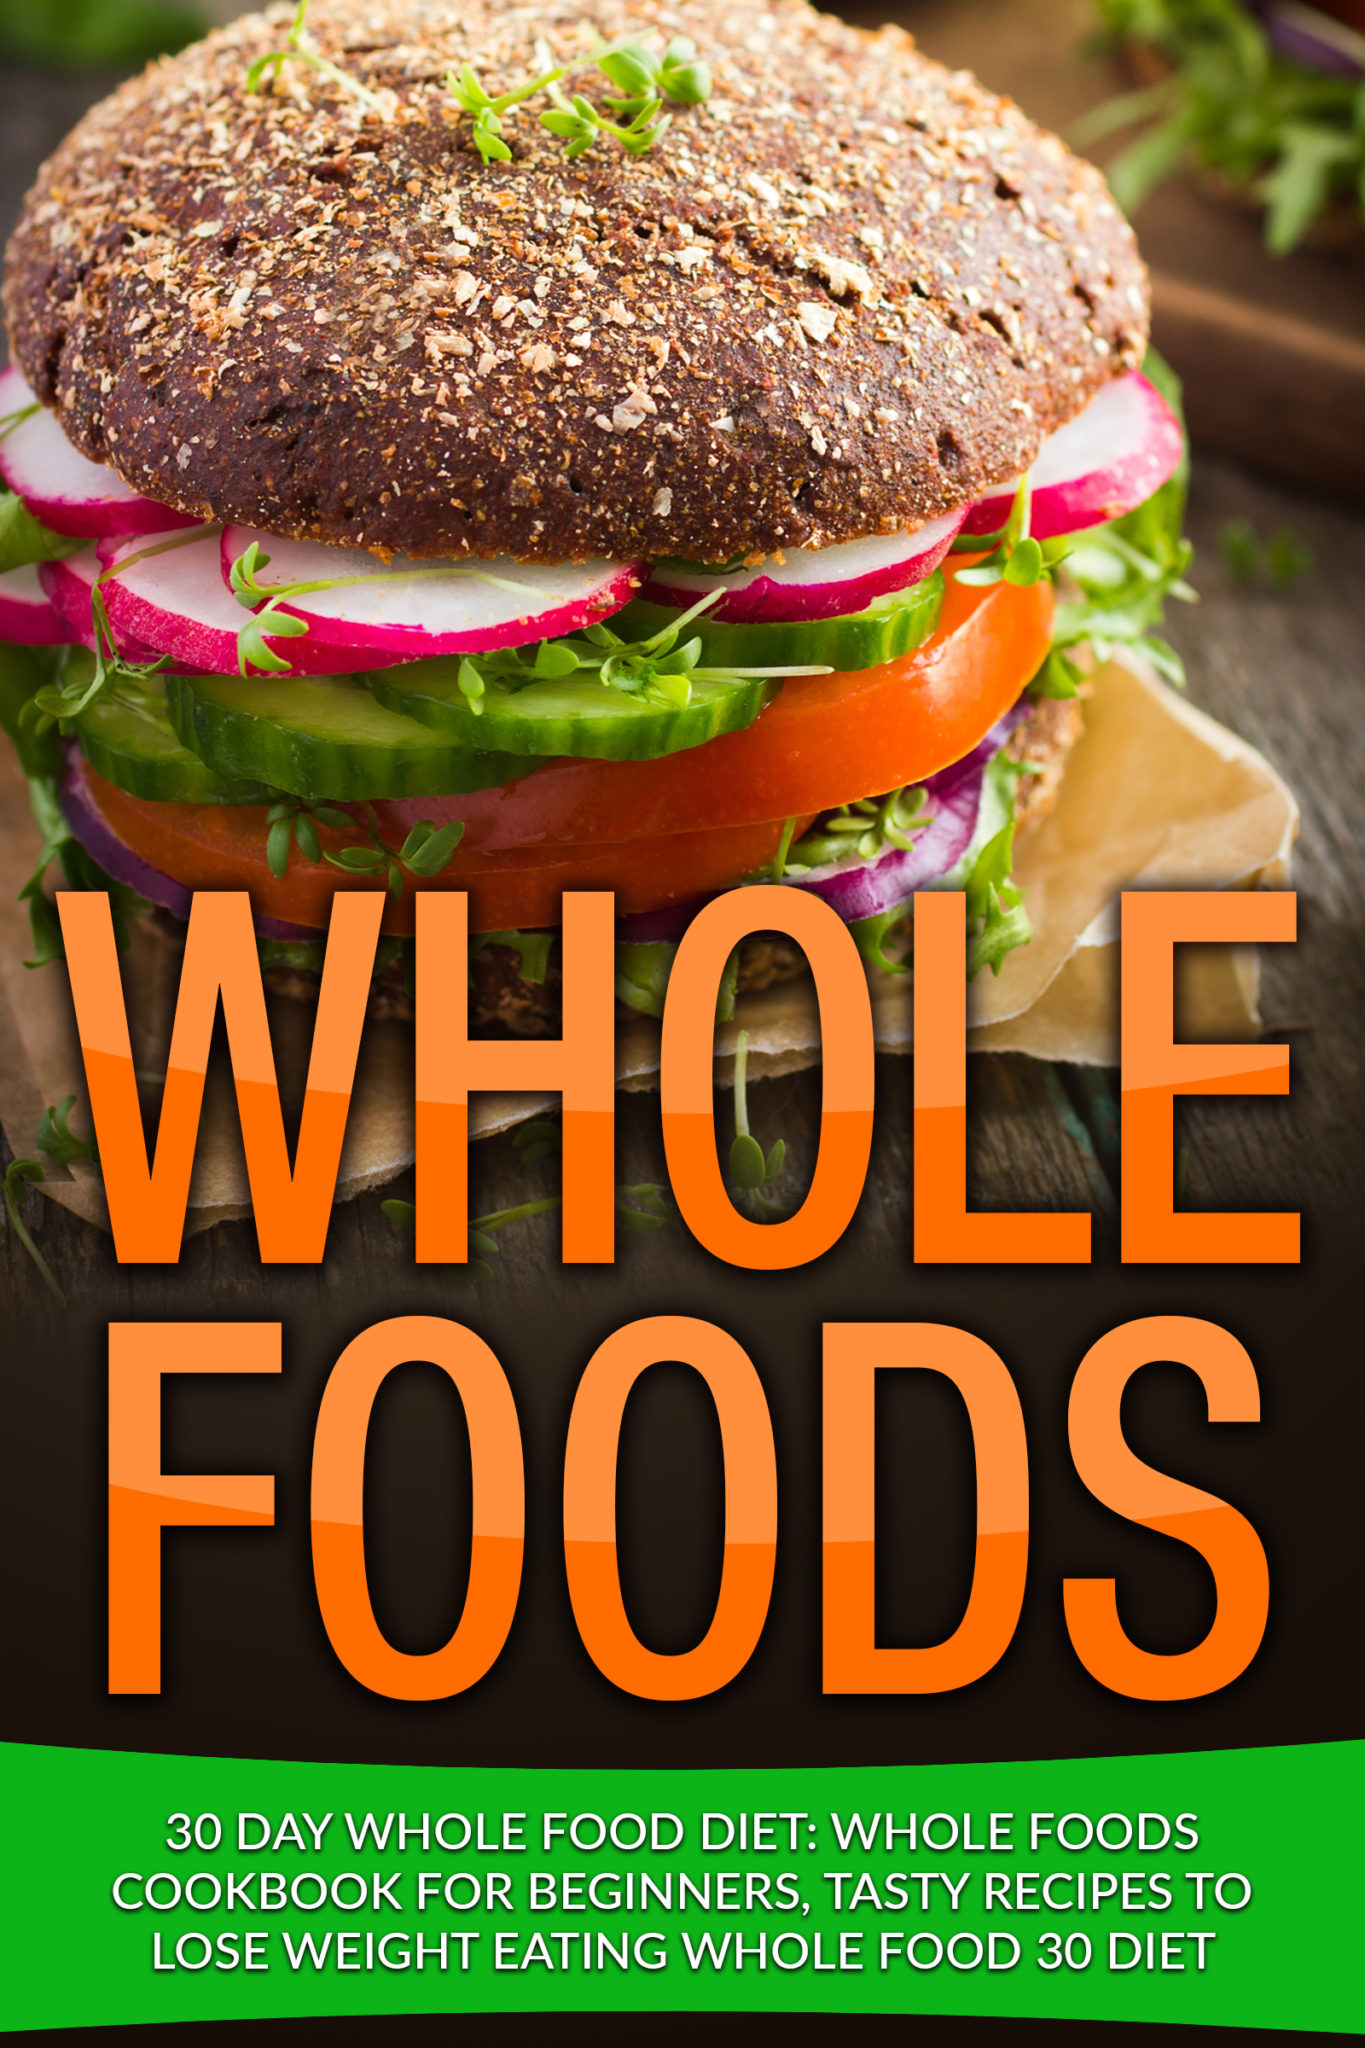 FREE: Whole: 30 Day Whole Food Diet: Whole Foods Cookbook for Beginners, Tasty Recipes to Lose Weight Eating Whole Food 30 Diet by James Wayne